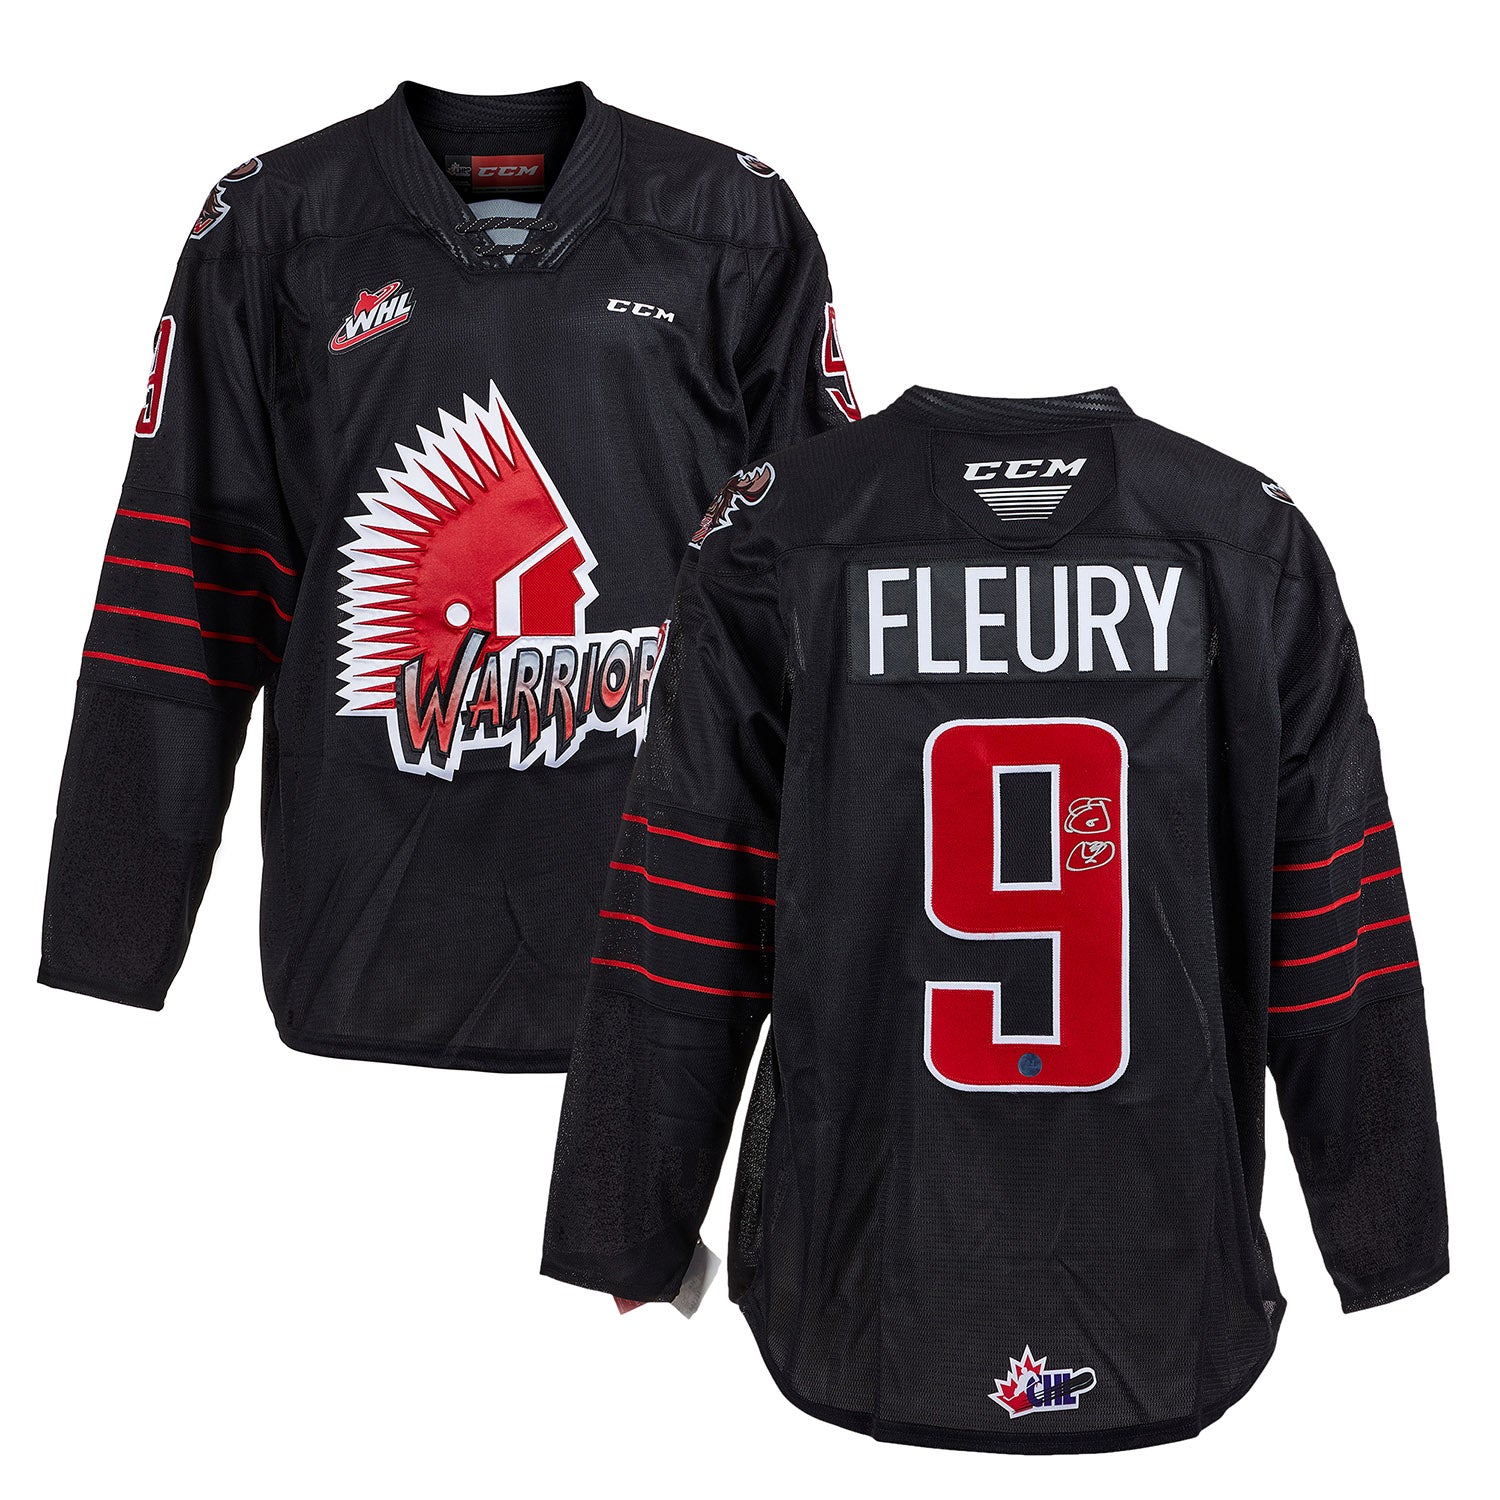 Theo Fleury Moose Jaw Warriors Autographed CHL Hockey Jersey